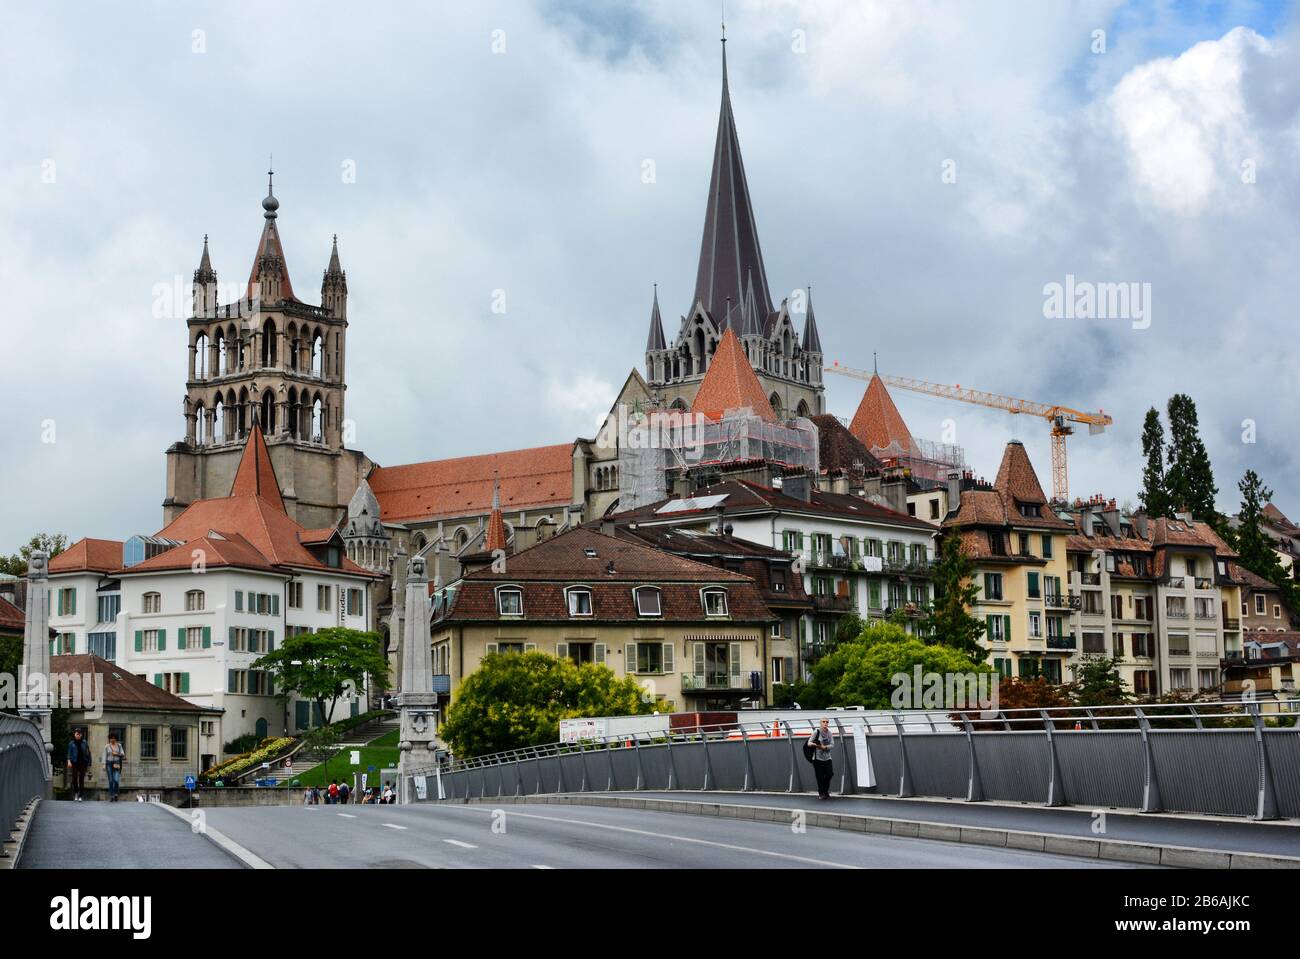 LAUSANNE, SWITZERLAND - JULY 7, 2014: The Cathedral of Notre Dame of Lausanne rises above the city. The Cathedral is currently undergoing renovation a Stock Photo